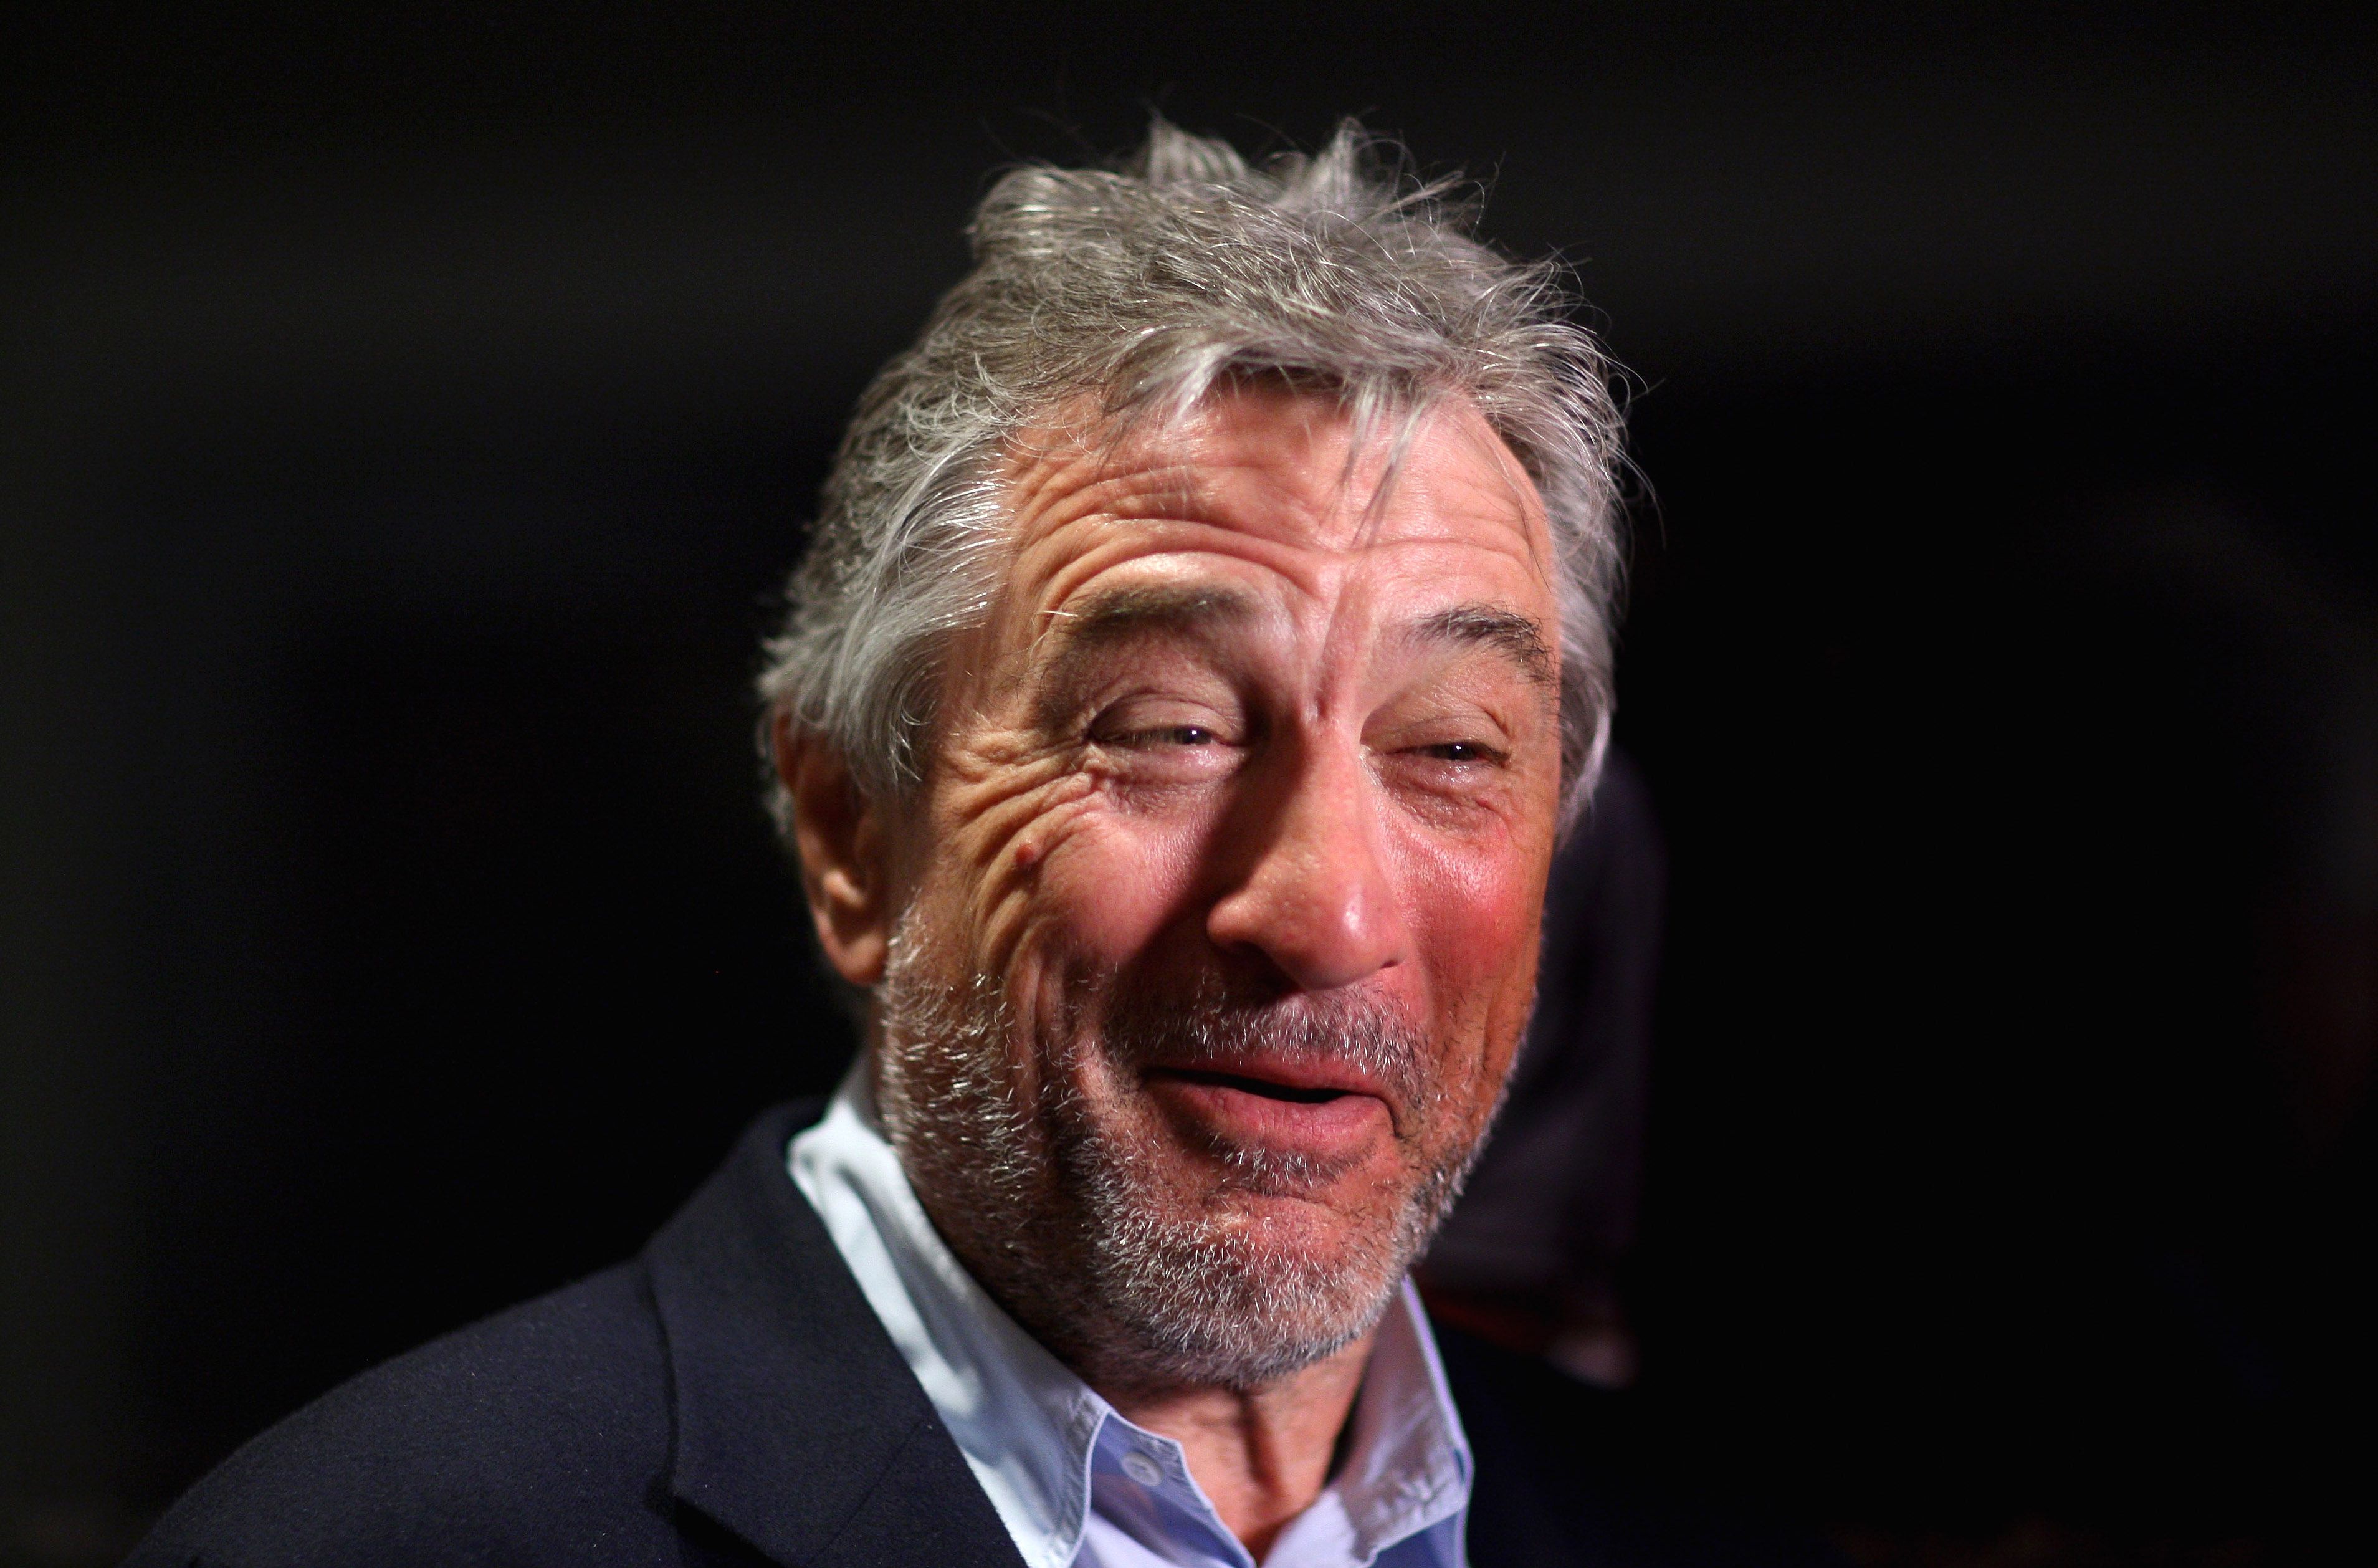 Robert De Niro during the Grand Opening of the new One&Only Cape Town resort on April 2, 2009, in Cape Town, South Africa. | Source: Getty Images